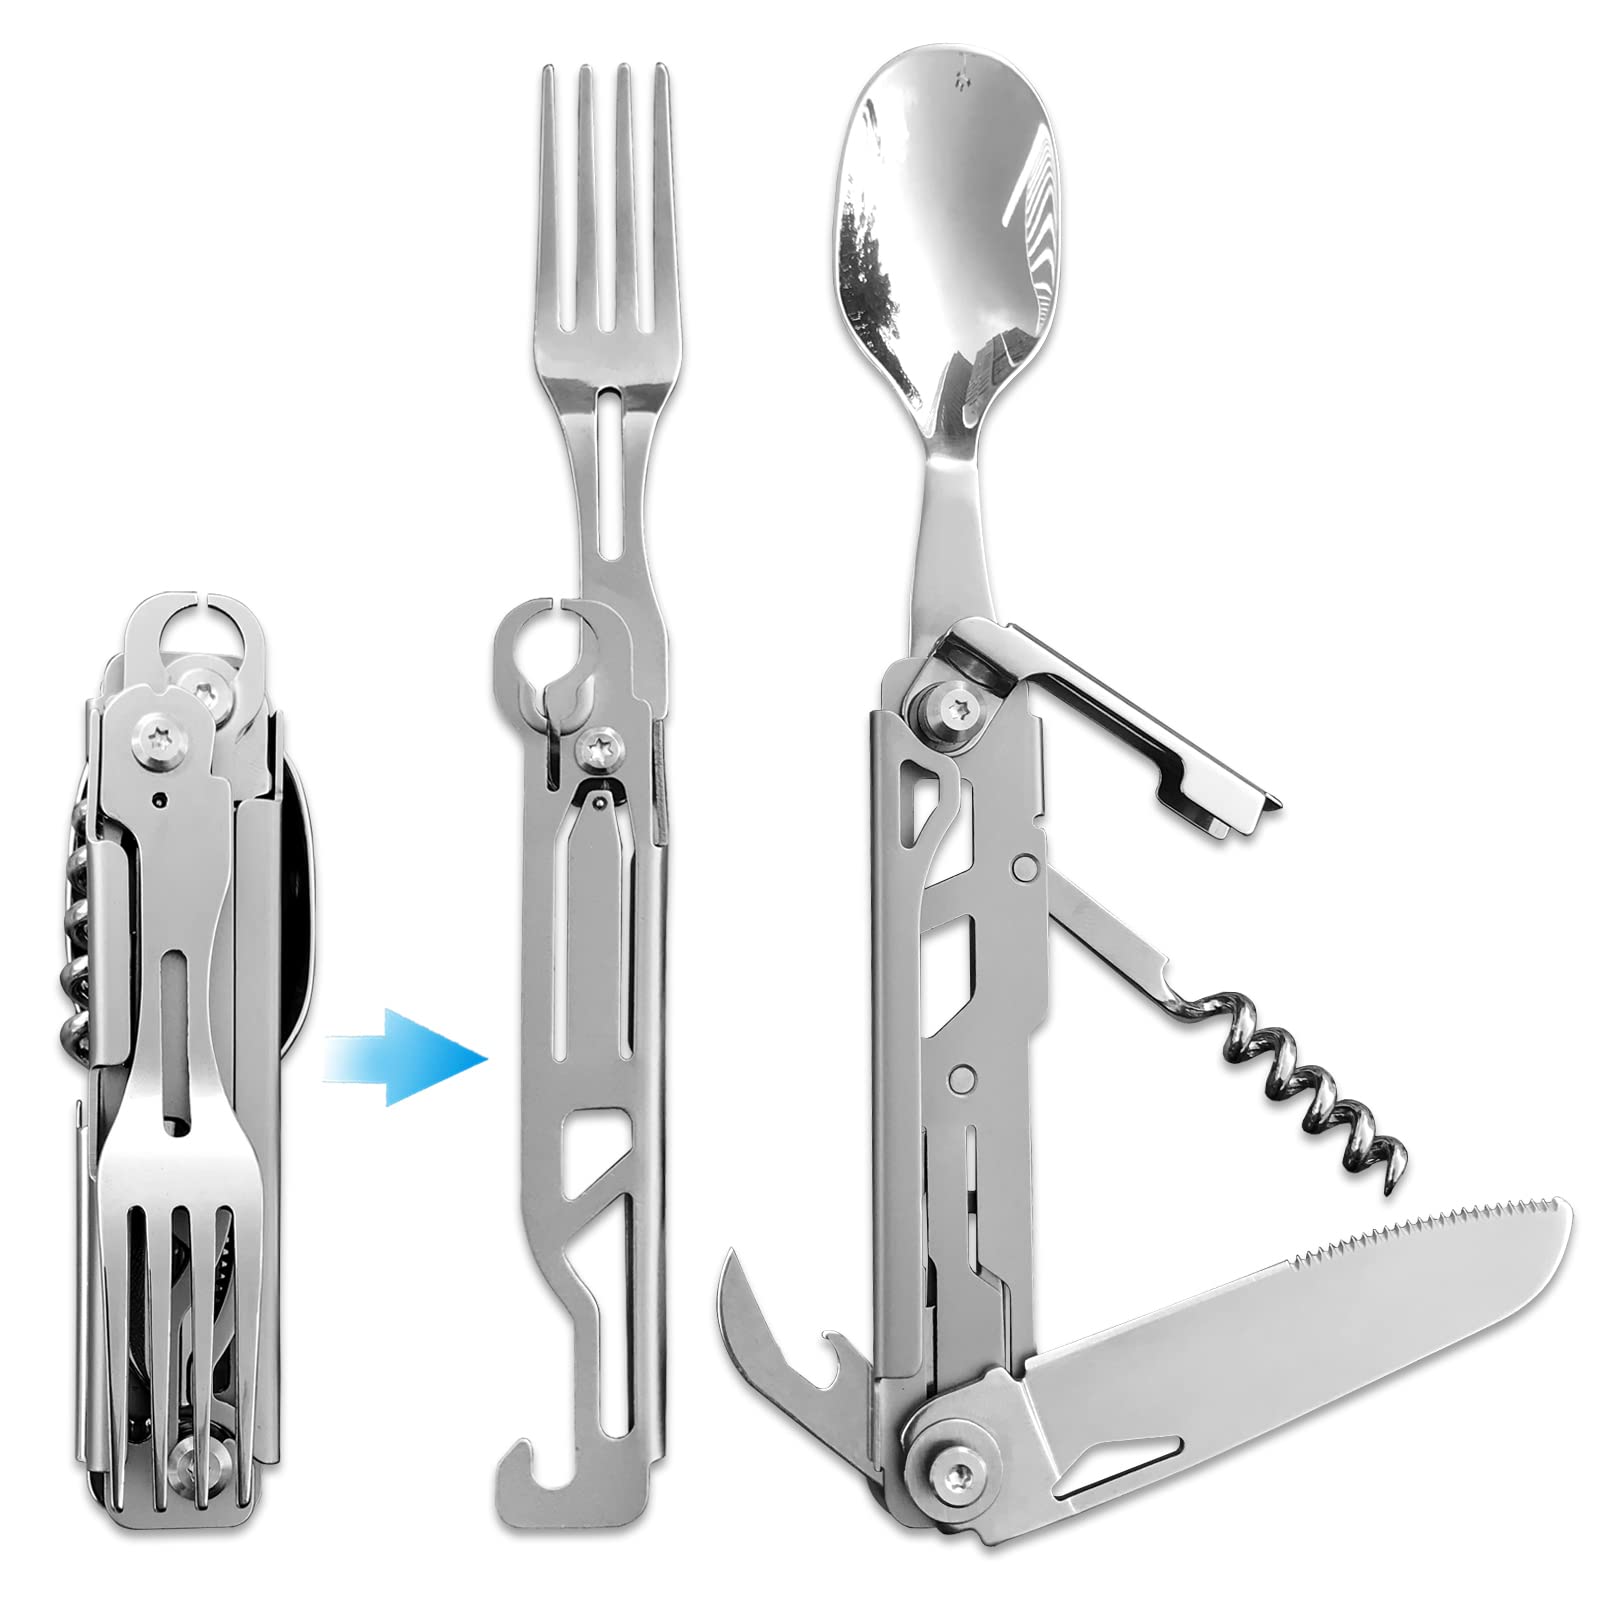 Portable Stainless Steel Flatware Set, Travel Camping Cutlery Set